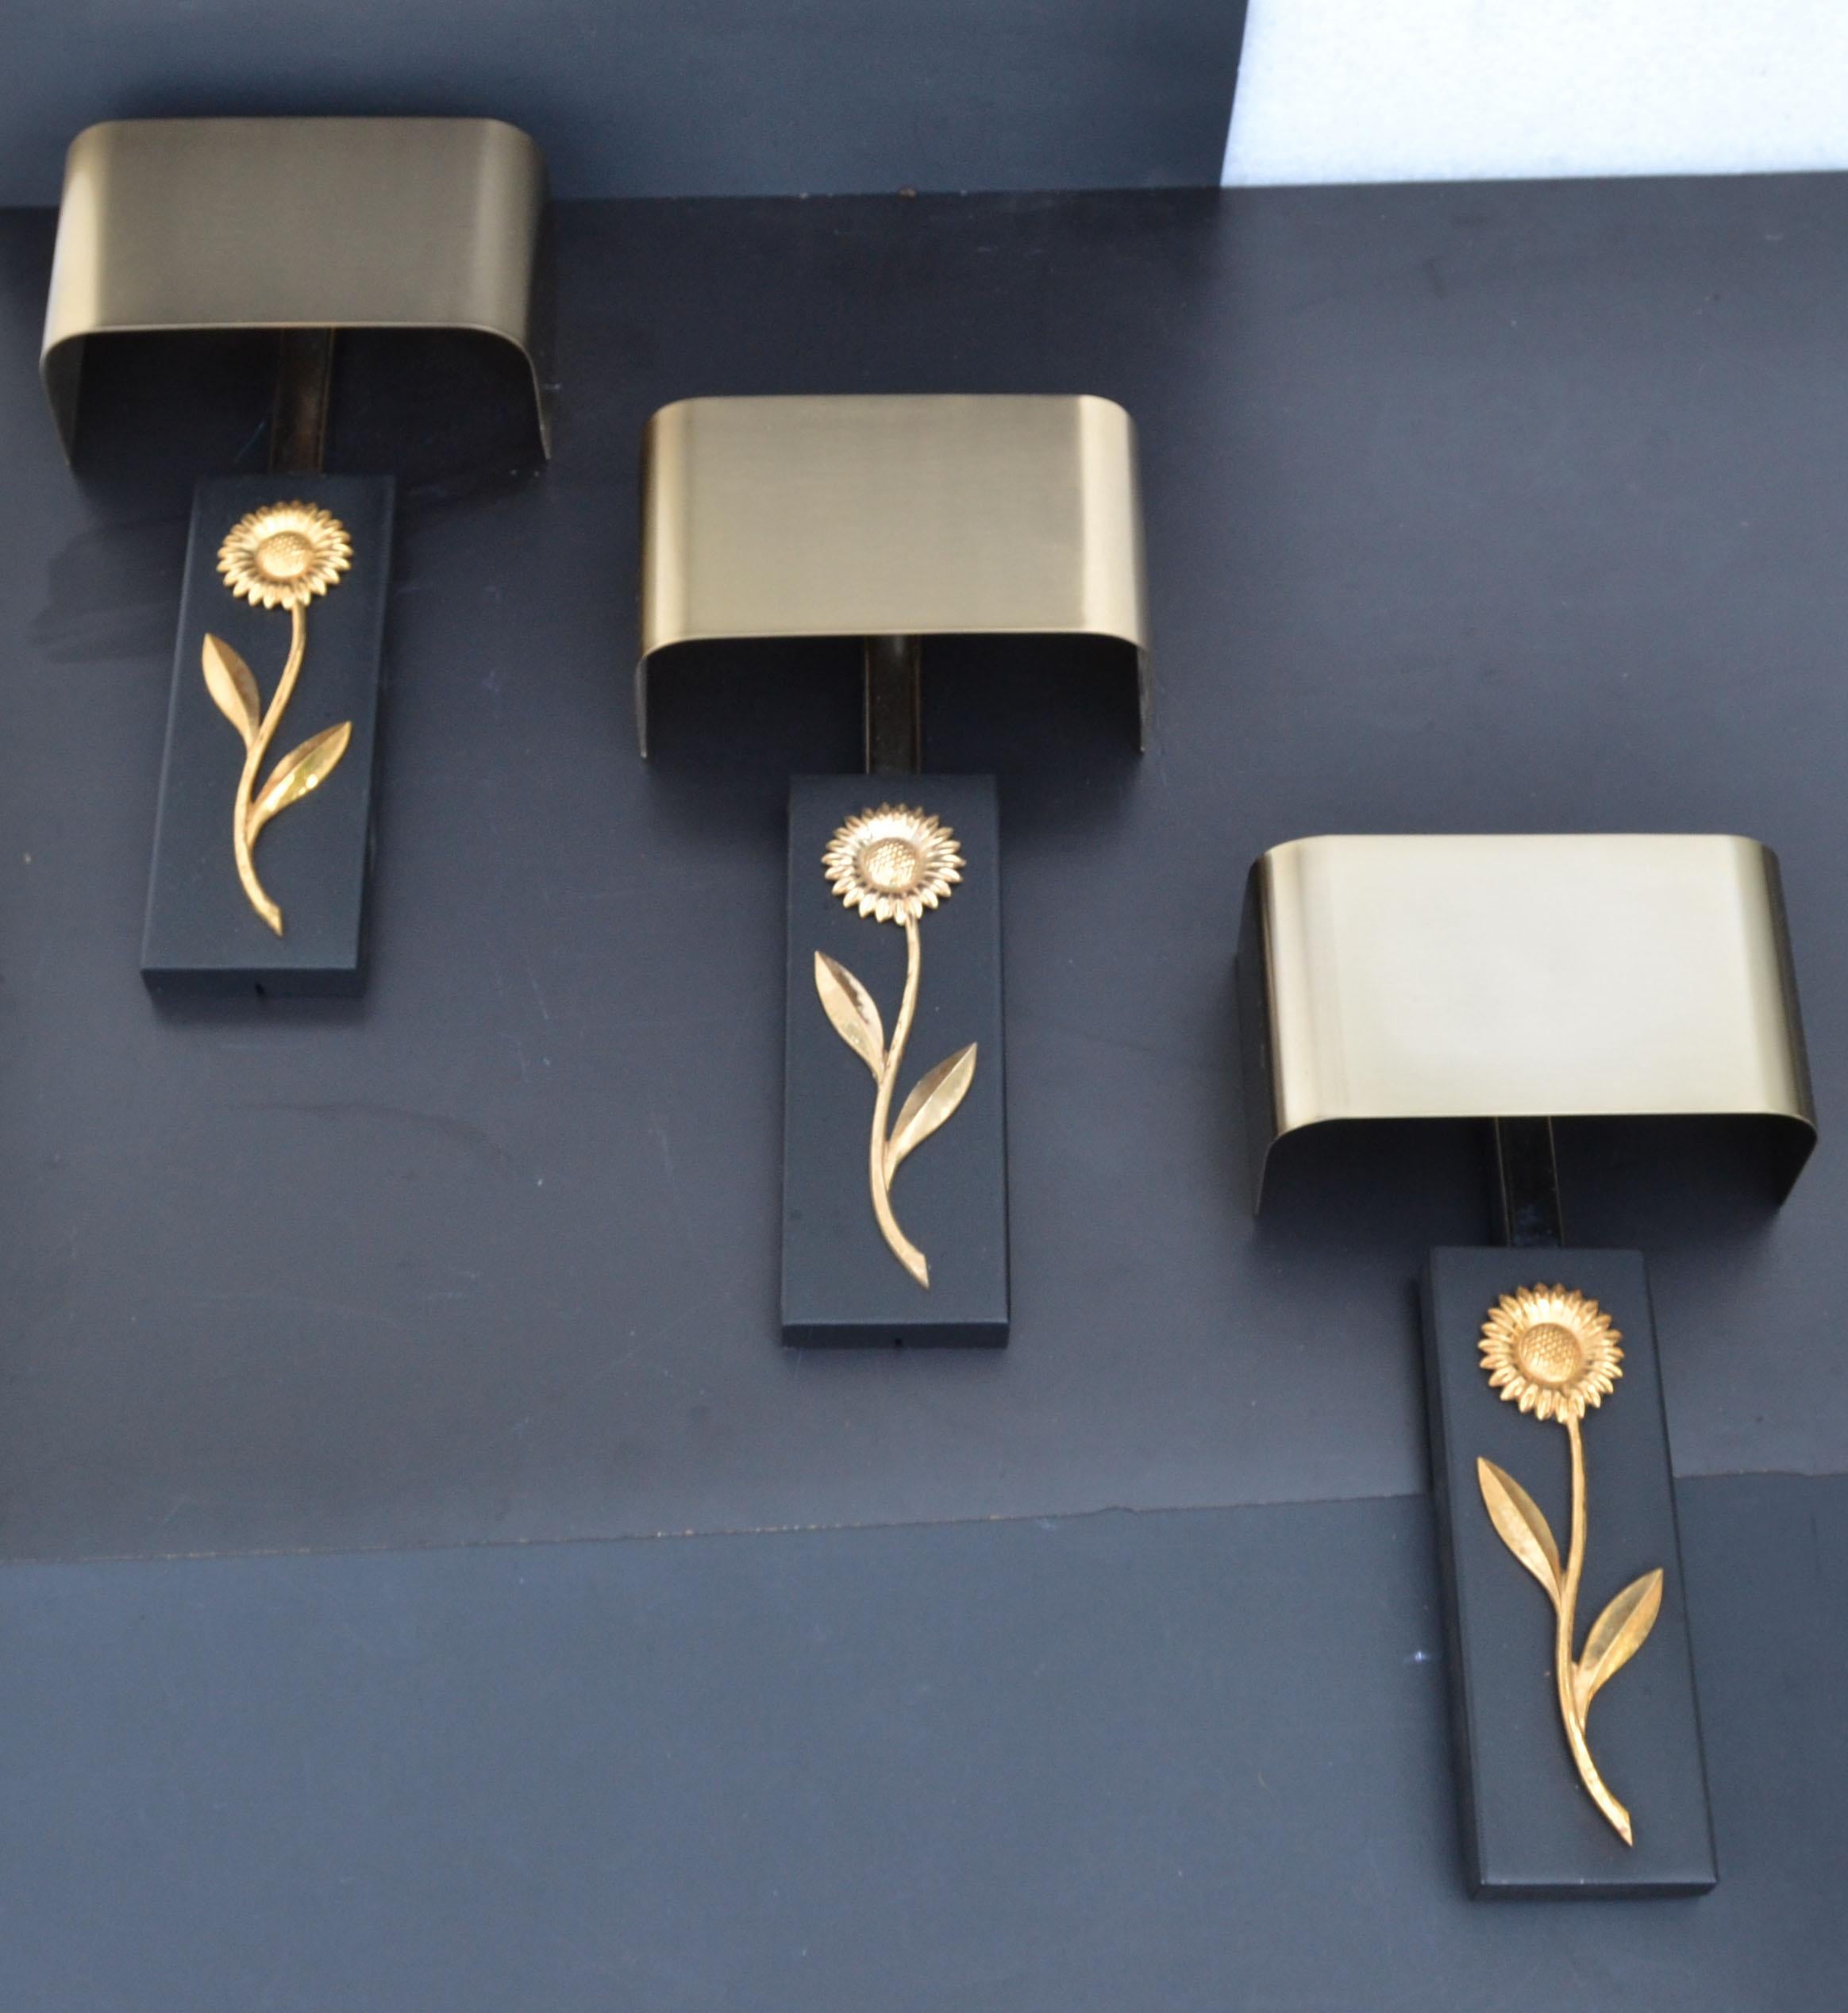 3 Maison Charles Bronze, Brass & Steel Sconces, Wall Lights Brushed Brass Shades 9